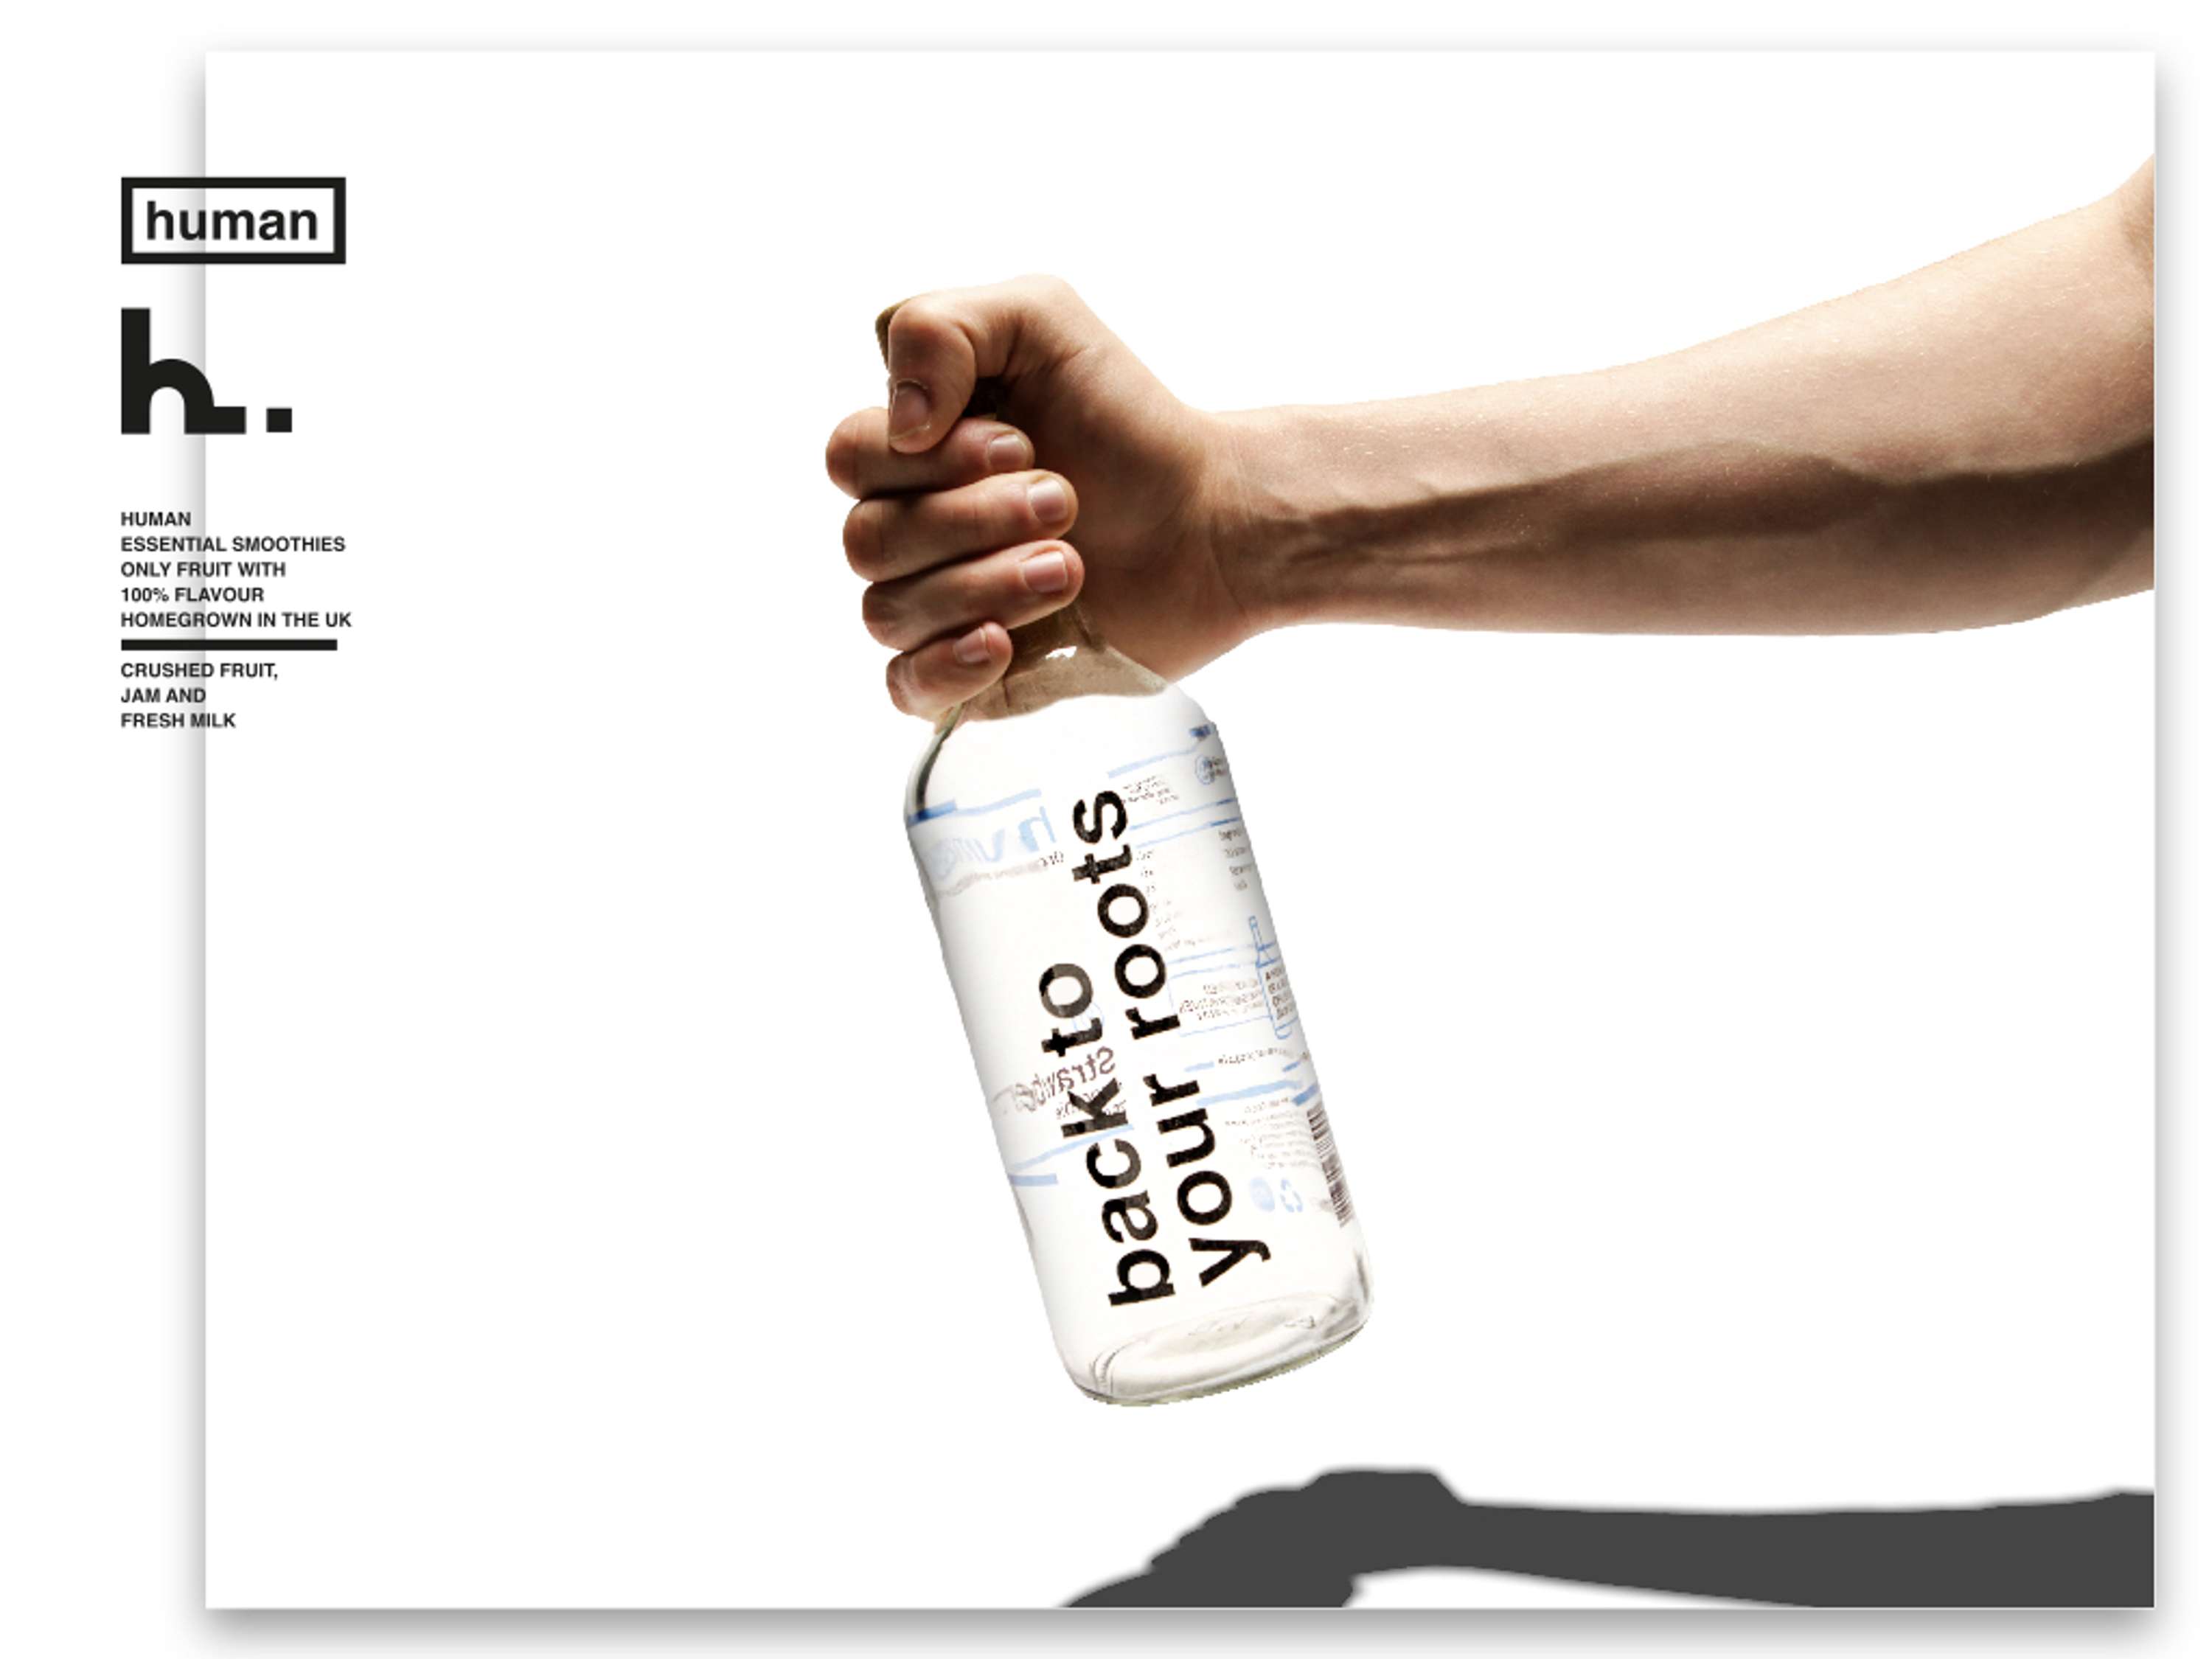 Human Smoothie Branding | The Dots